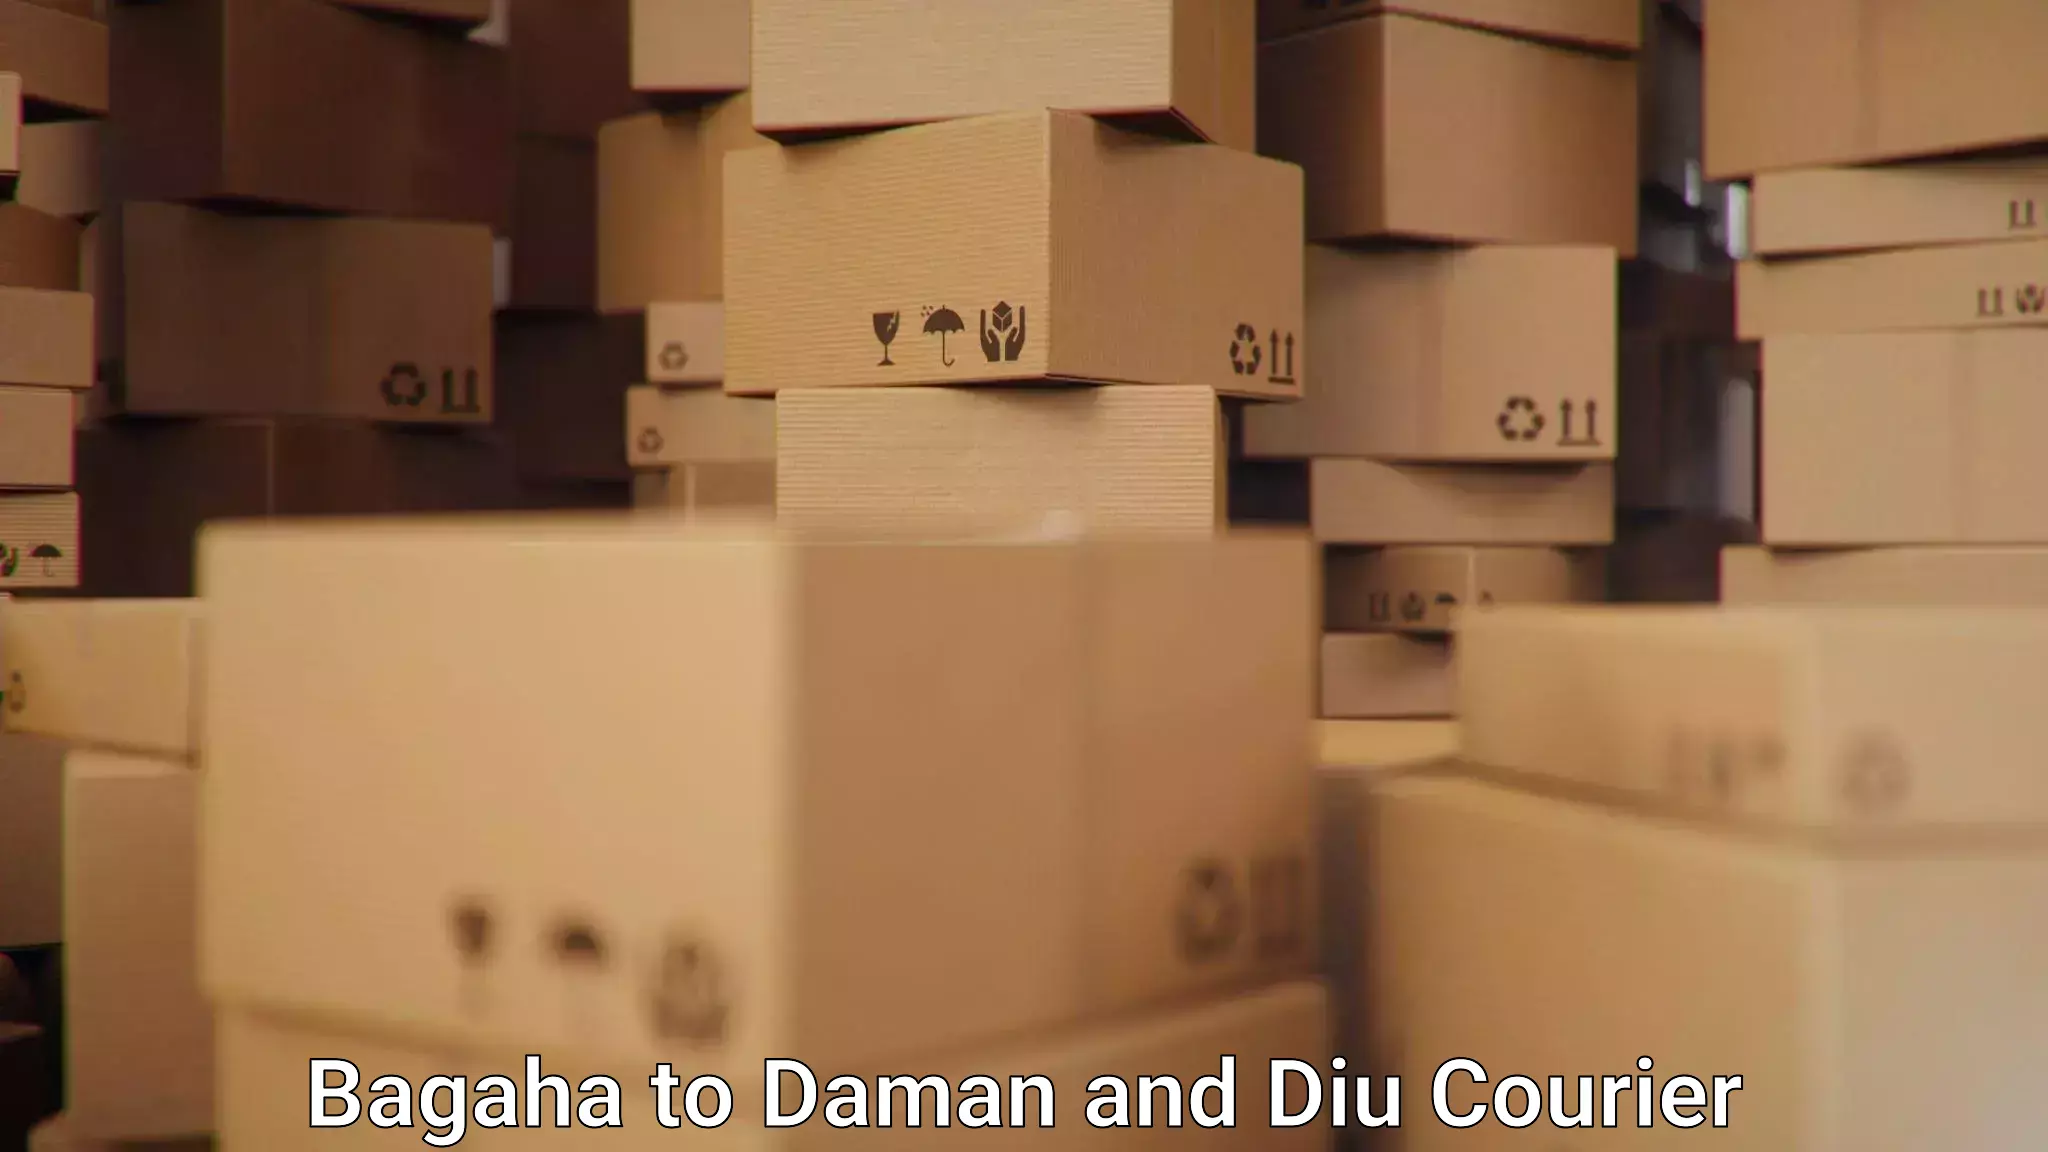 Courier service innovation Bagaha to Daman and Diu